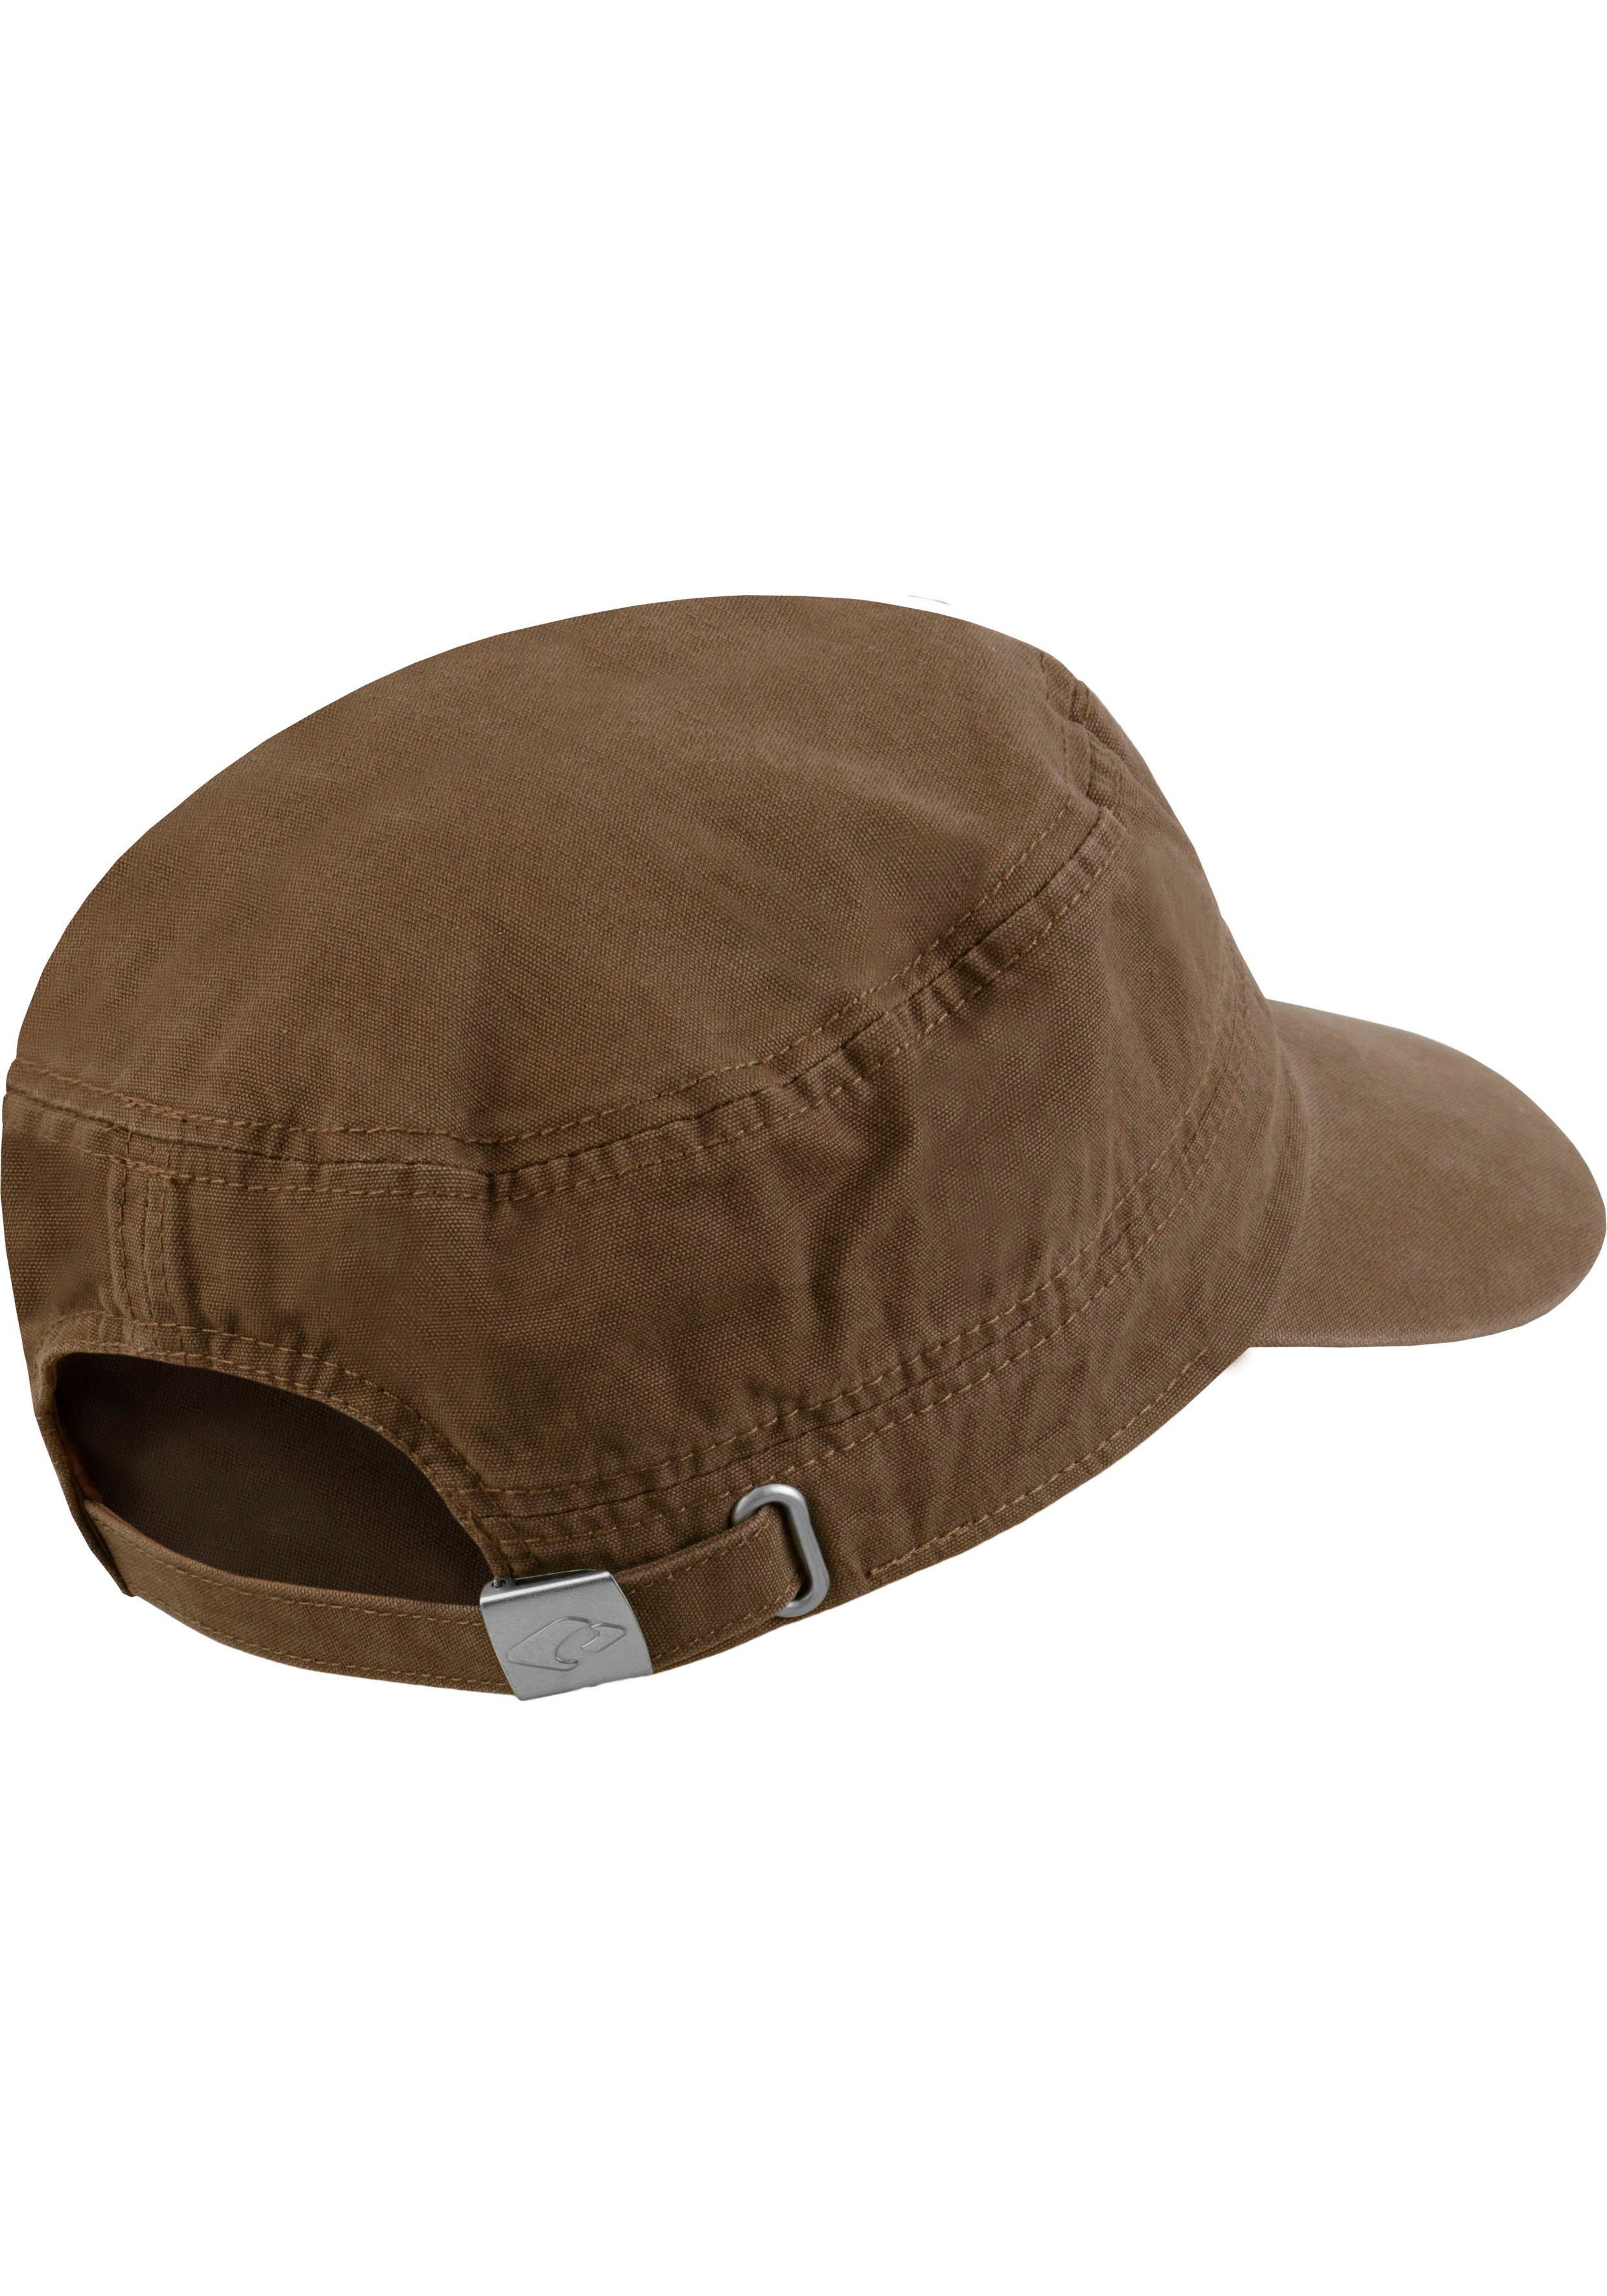 Cap Mililtary-Style Army Hat braun im Dublin Cap chillouts